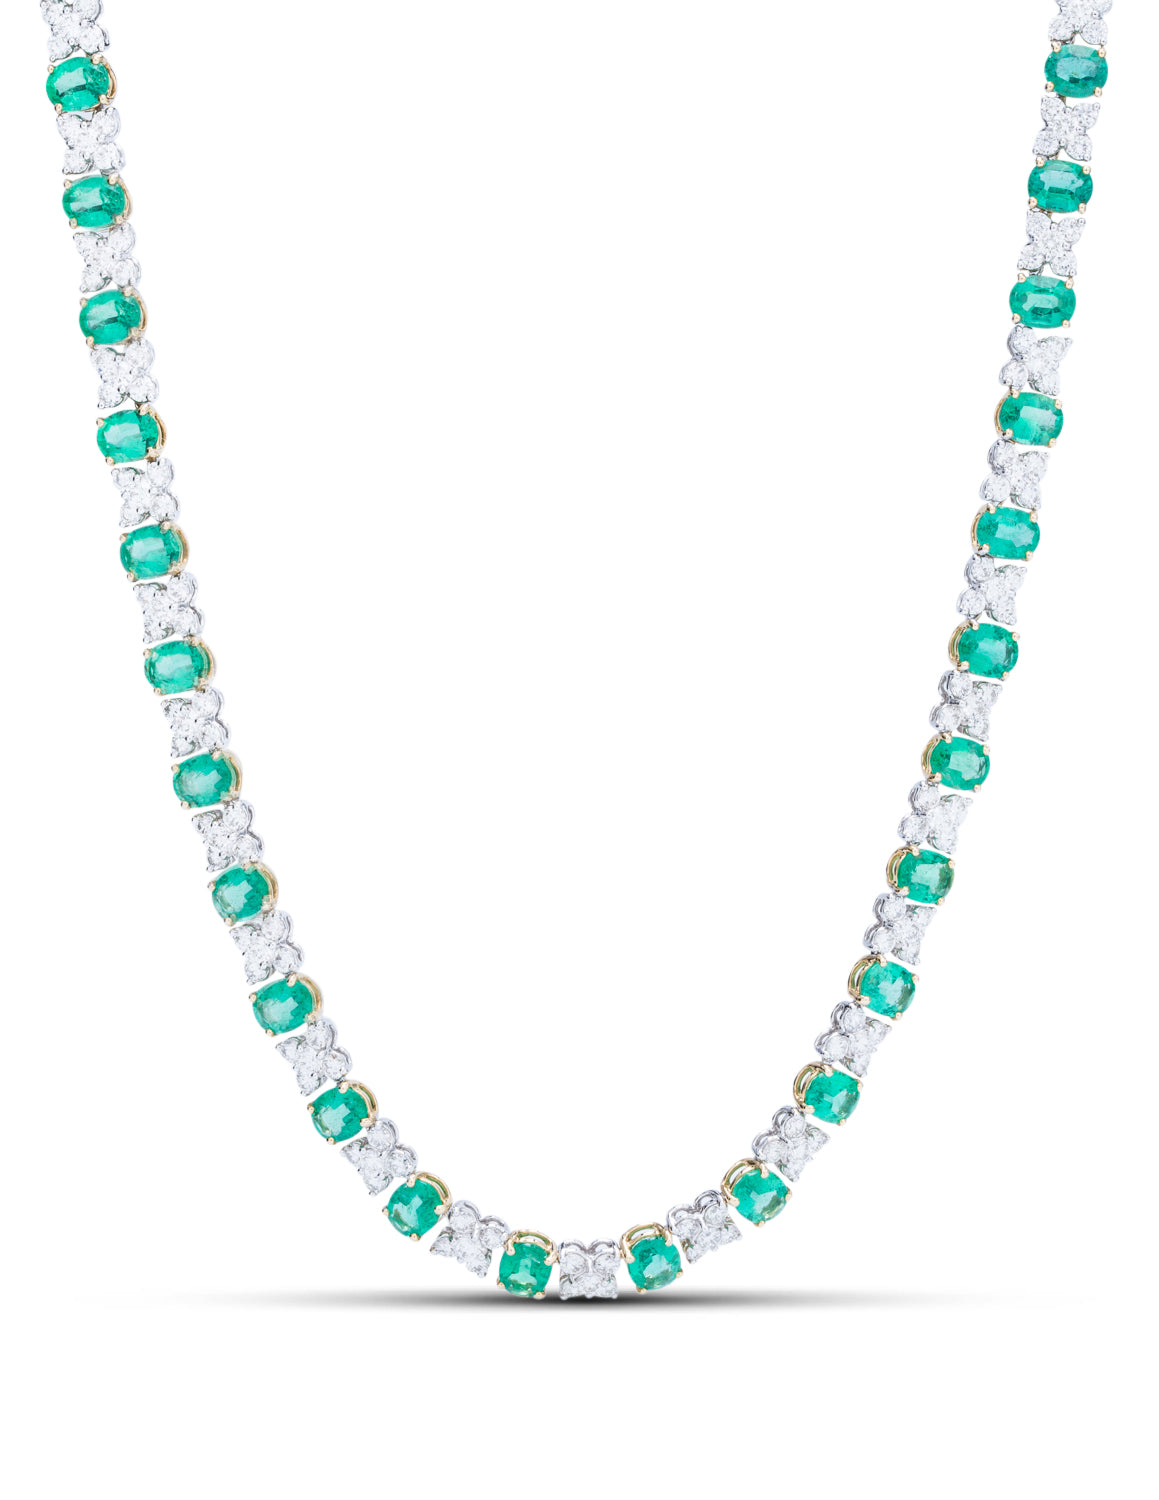 Emerald and Diamond Necklace - Charles Koll Jewellers